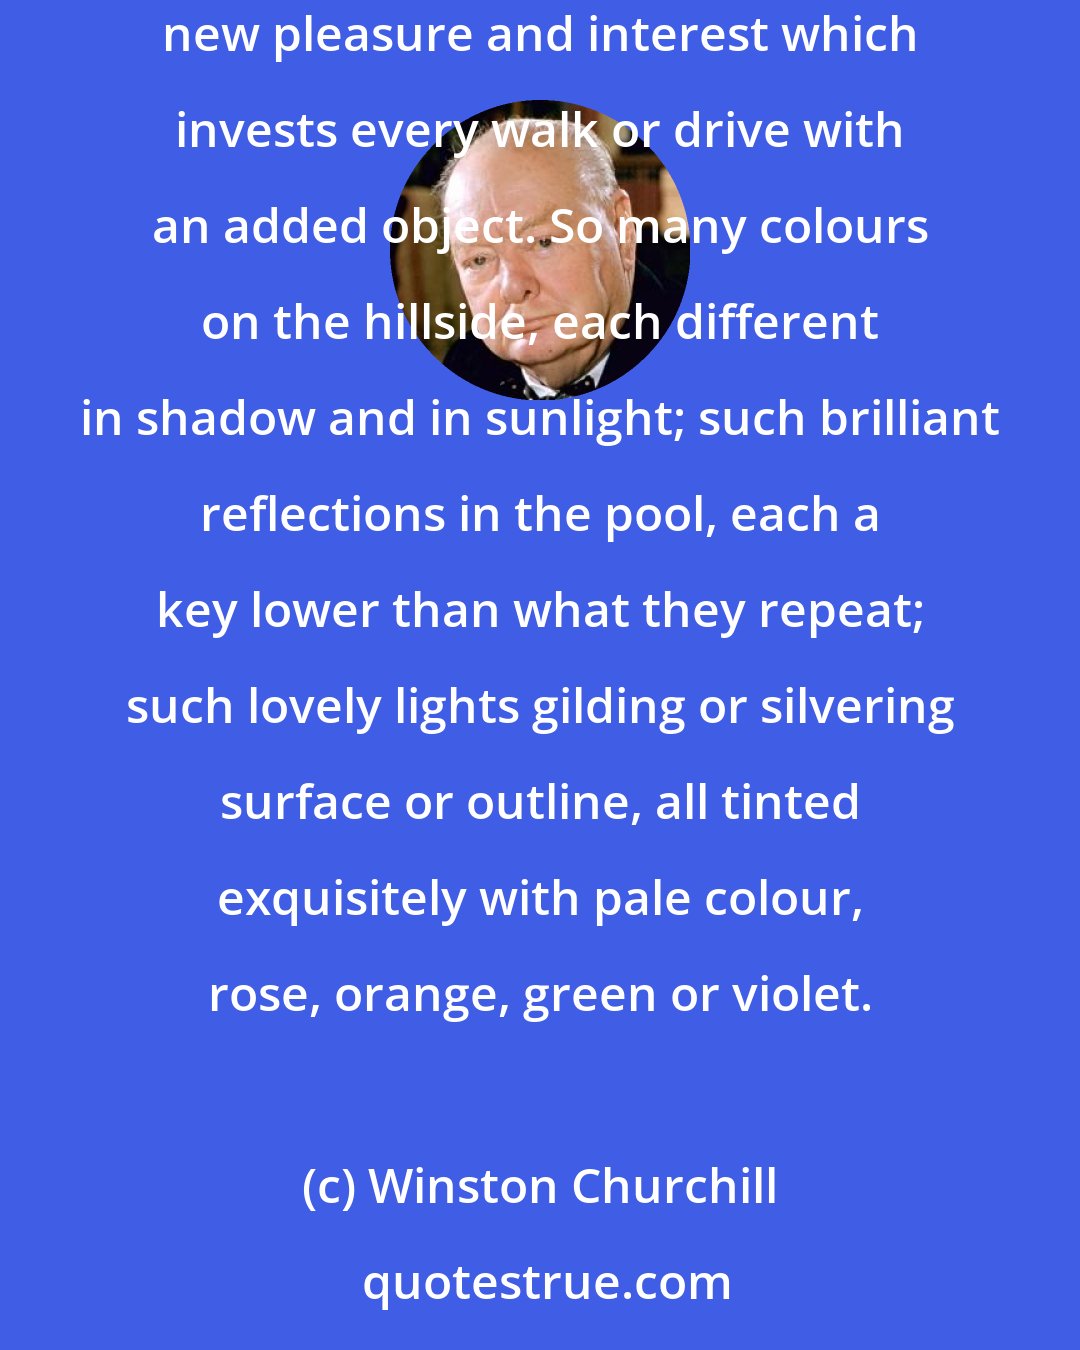 Winston Churchill: One is quite astonished to find how many things there are in the landscape, and in every object in it, one never noticed before. And this is a tremendous new pleasure and interest which invests every walk or drive with an added object. So many colours on the hillside, each different in shadow and in sunlight; such brilliant reflections in the pool, each a key lower than what they repeat; such lovely lights gilding or silvering surface or outline, all tinted exquisitely with pale colour, rose, orange, green or violet.